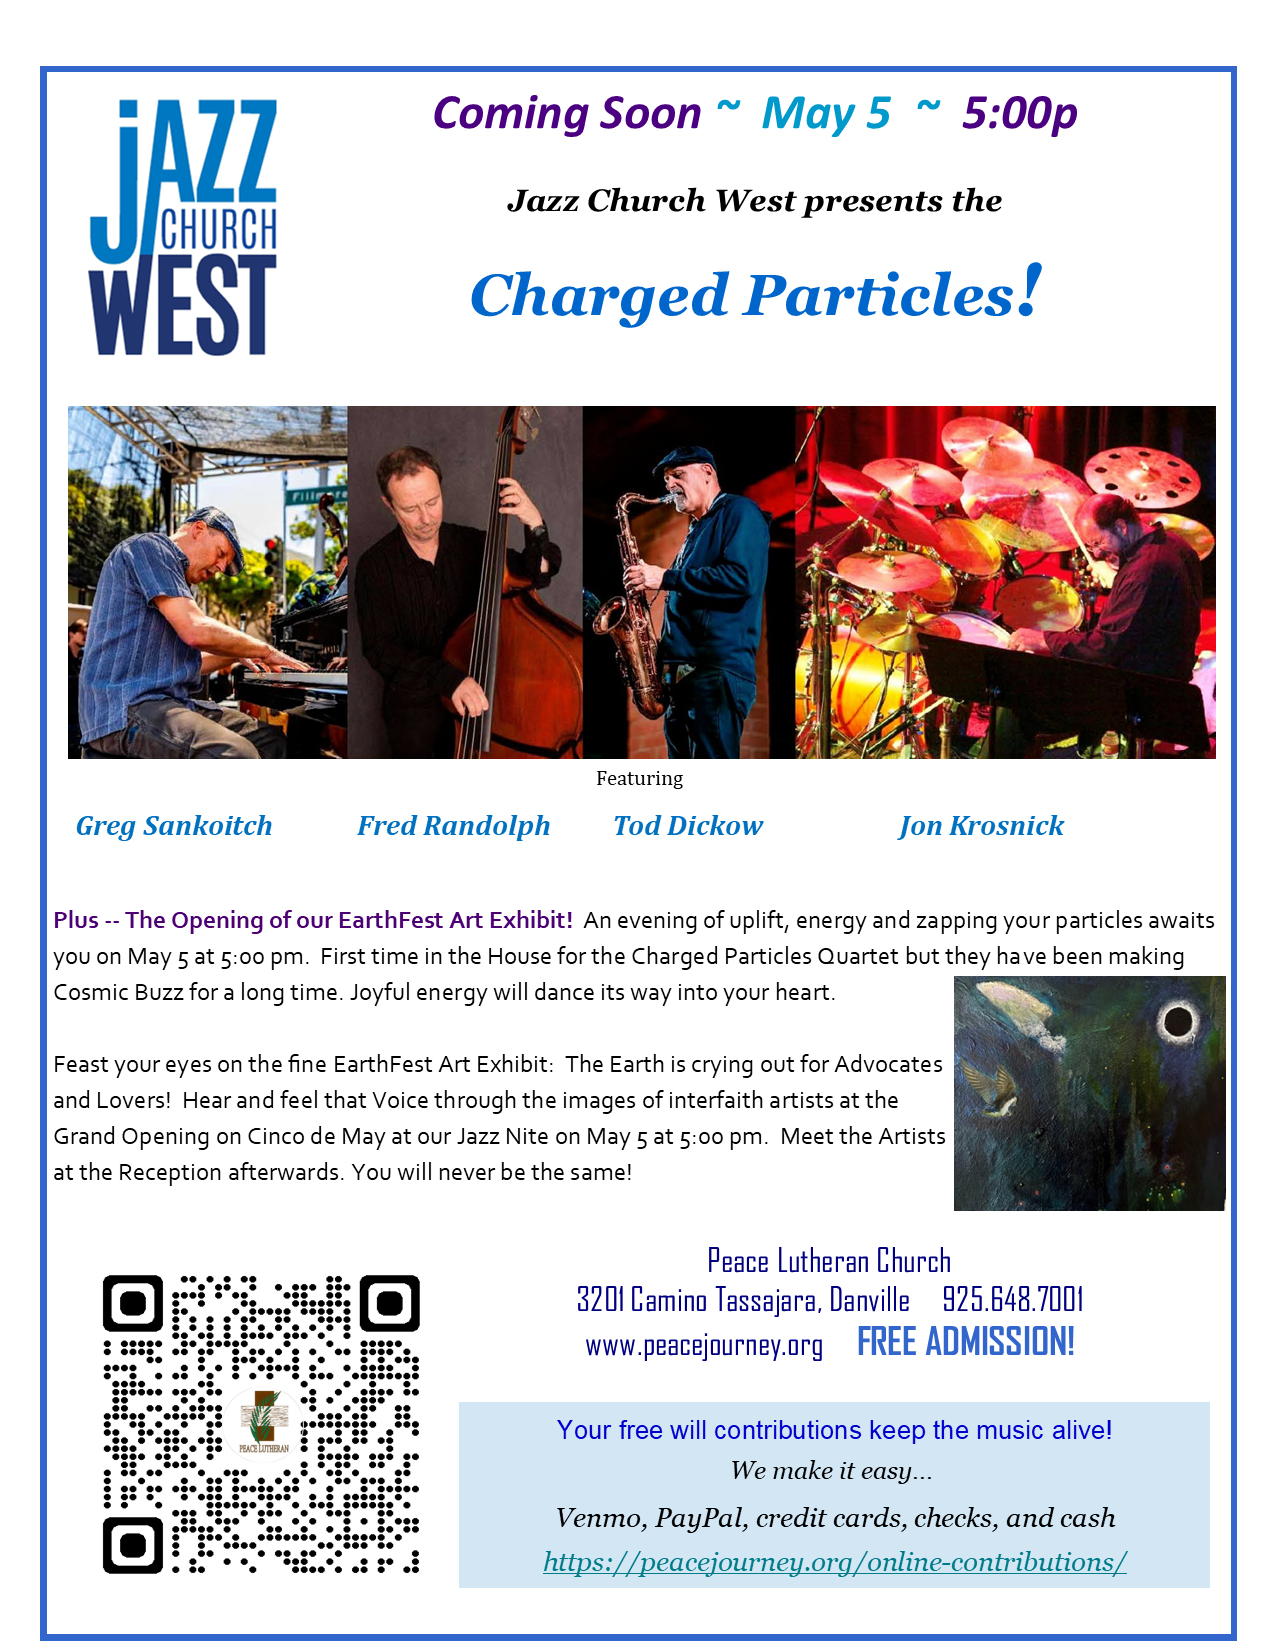 May 5th at 5:00 PM Jazz Church West presents the Charged Particles! Greg Sankoitch, Fed Randolph, Tod Dickow, and Job Krosnick. An evening of uplift, energy and zapping your particles awaits you on May 5 at 5:00 pm. First time in the House for the Charged Particles Quartet but they have been making the Cosmic Buzz for a long time. Joyful energy will dance its way into your heart.